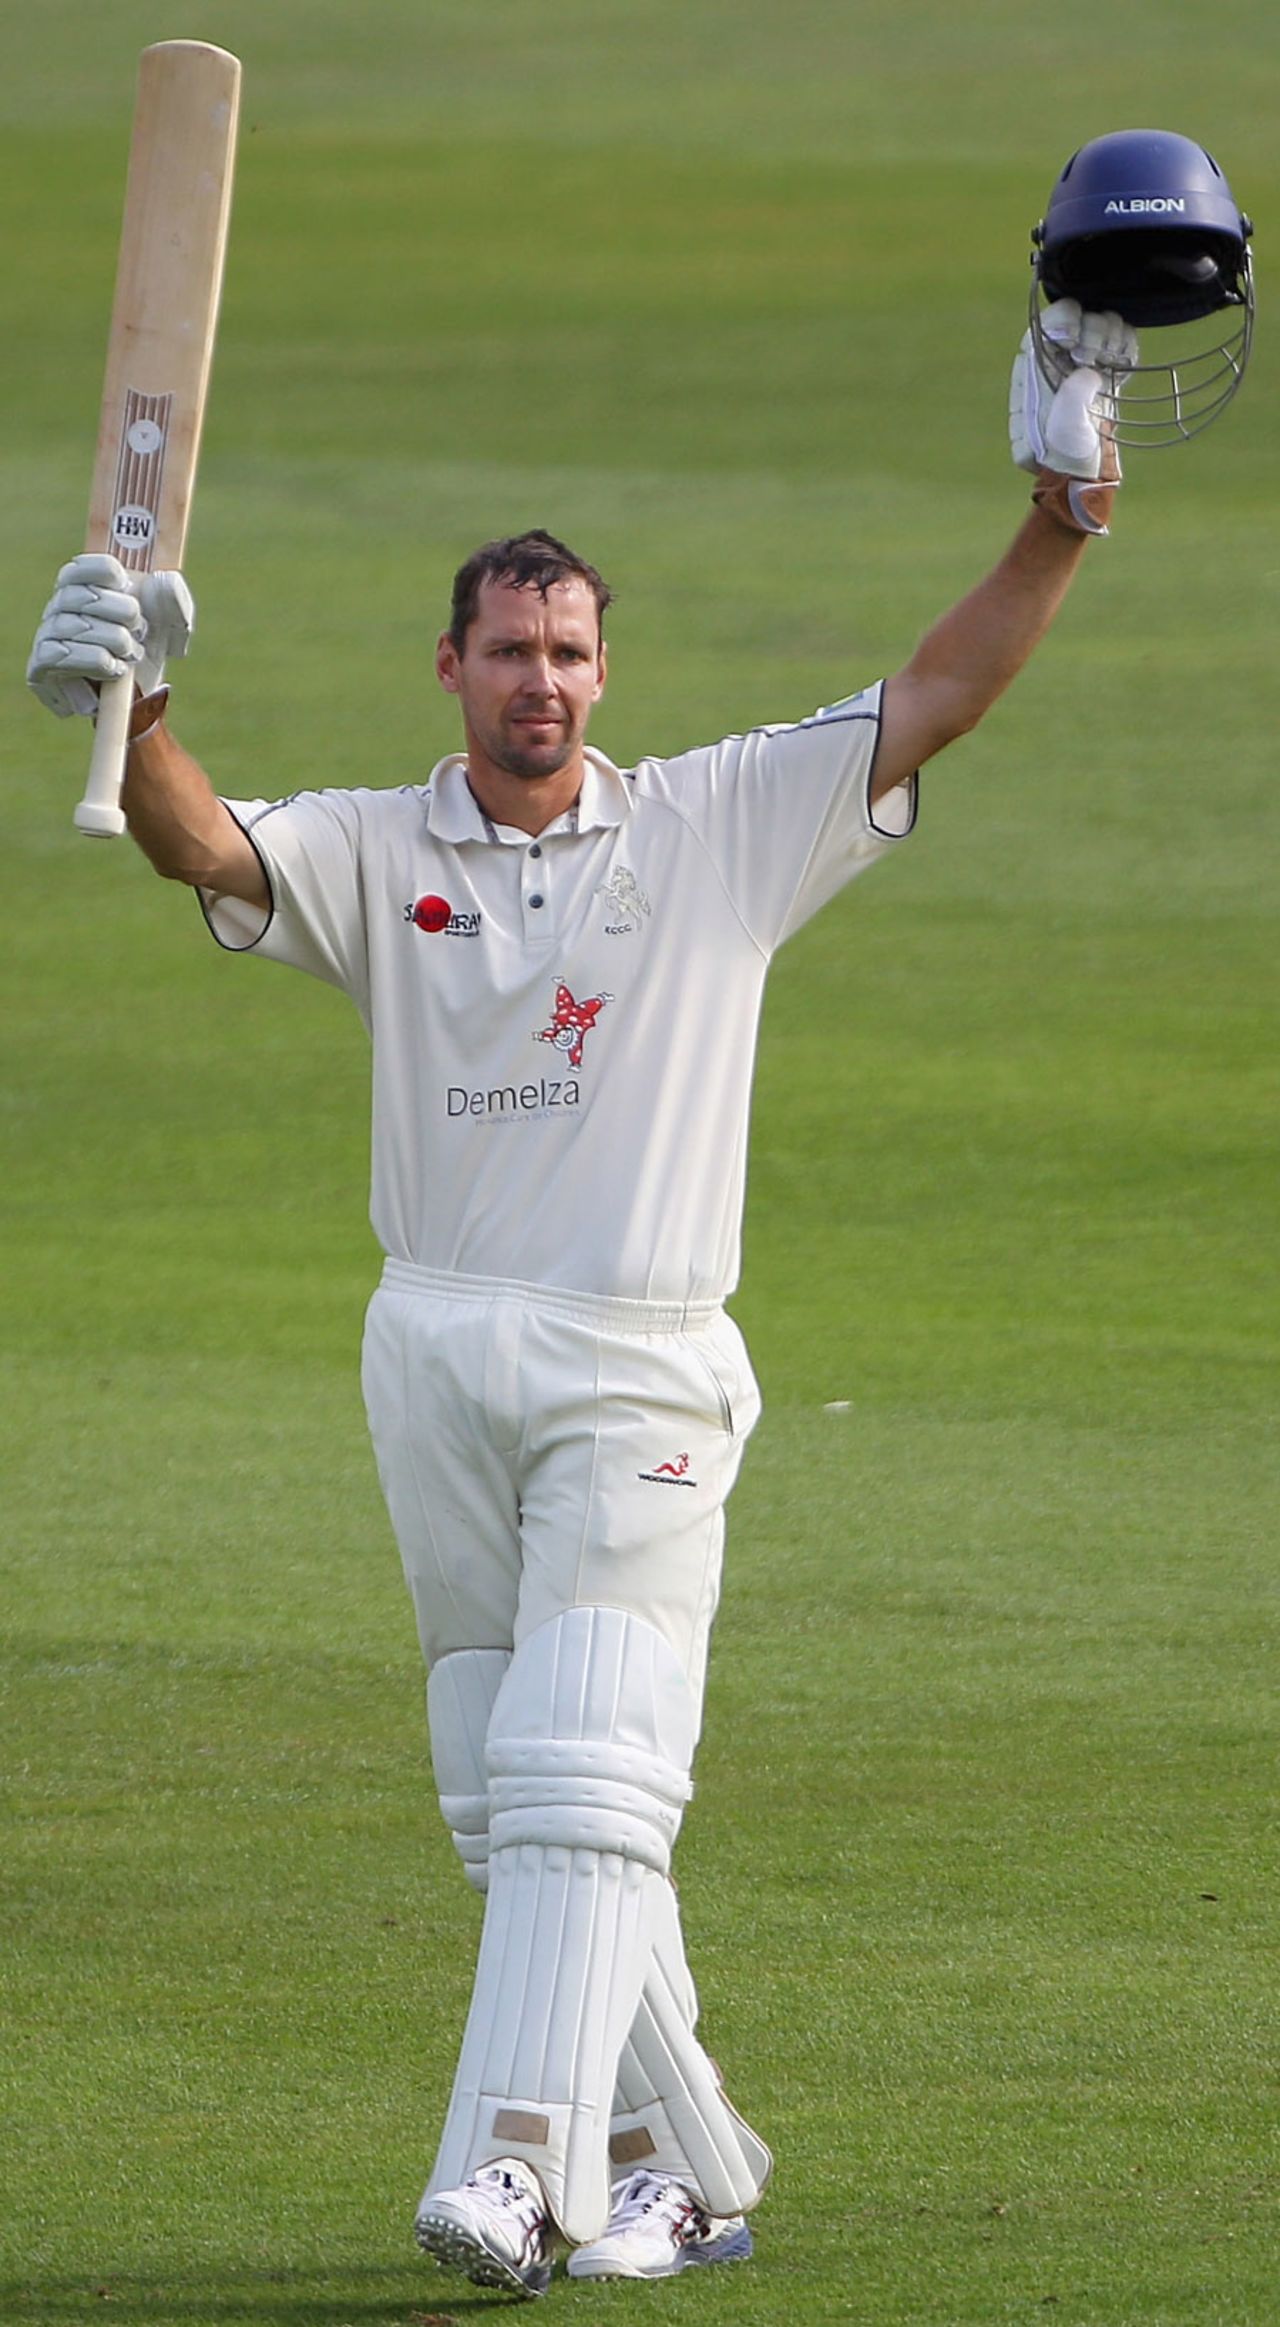 Martin van Jaarsveld reached his century off 148 deliveries to help put Kent in control, Kent v Essex, County Championship, Division One, Canterbury, July 29, 2010